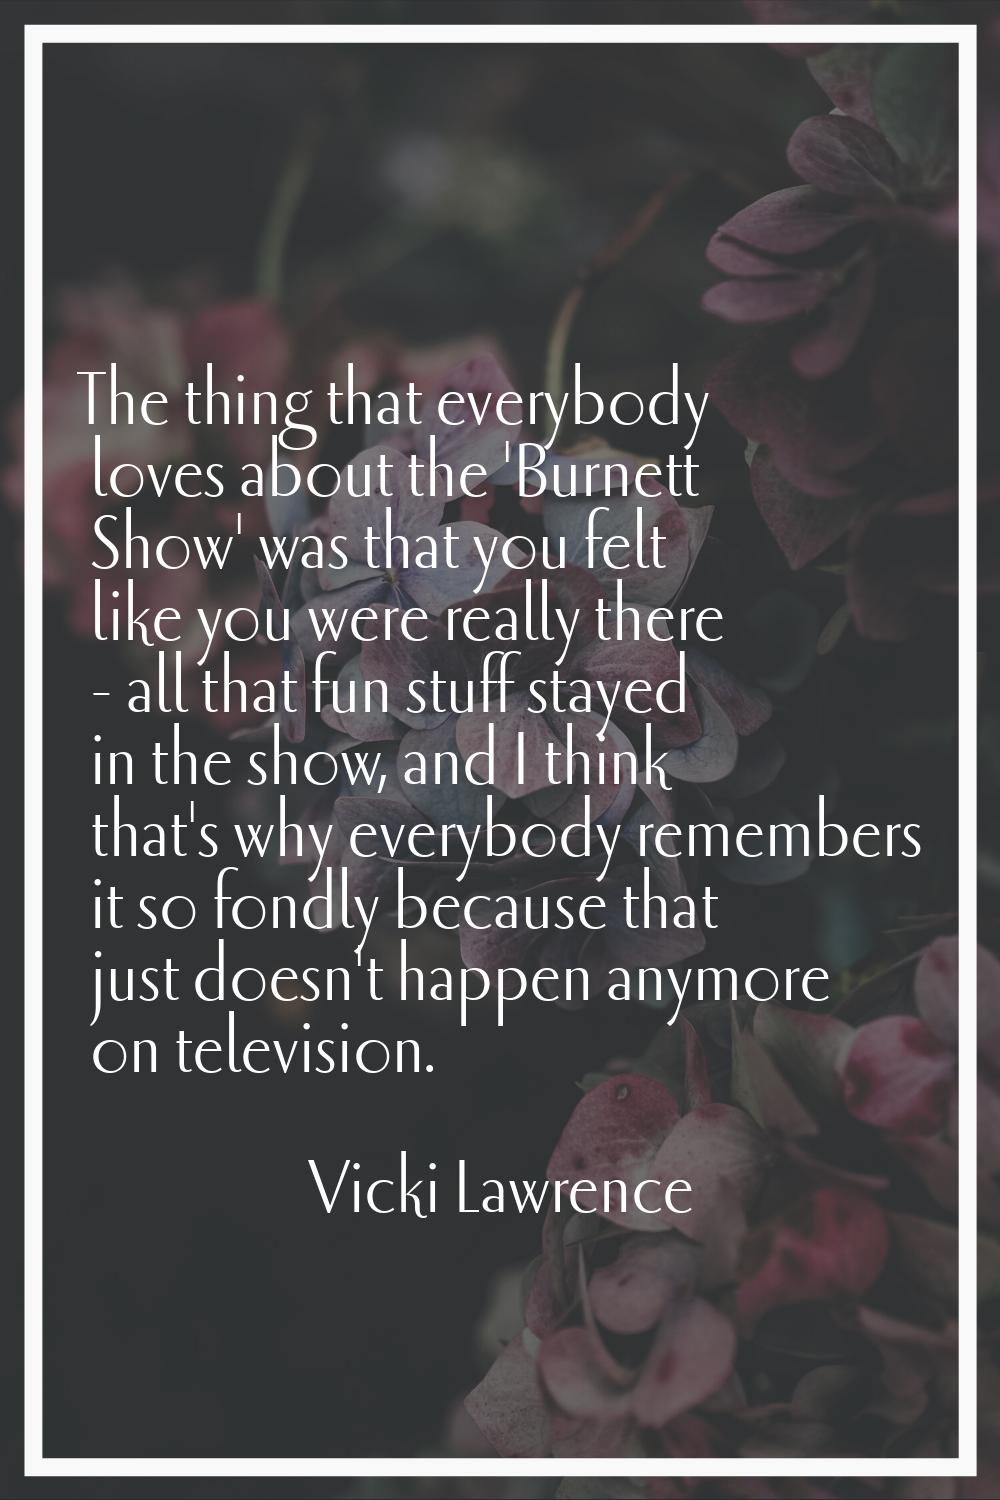 The thing that everybody loves about the 'Burnett Show' was that you felt like you were really ther